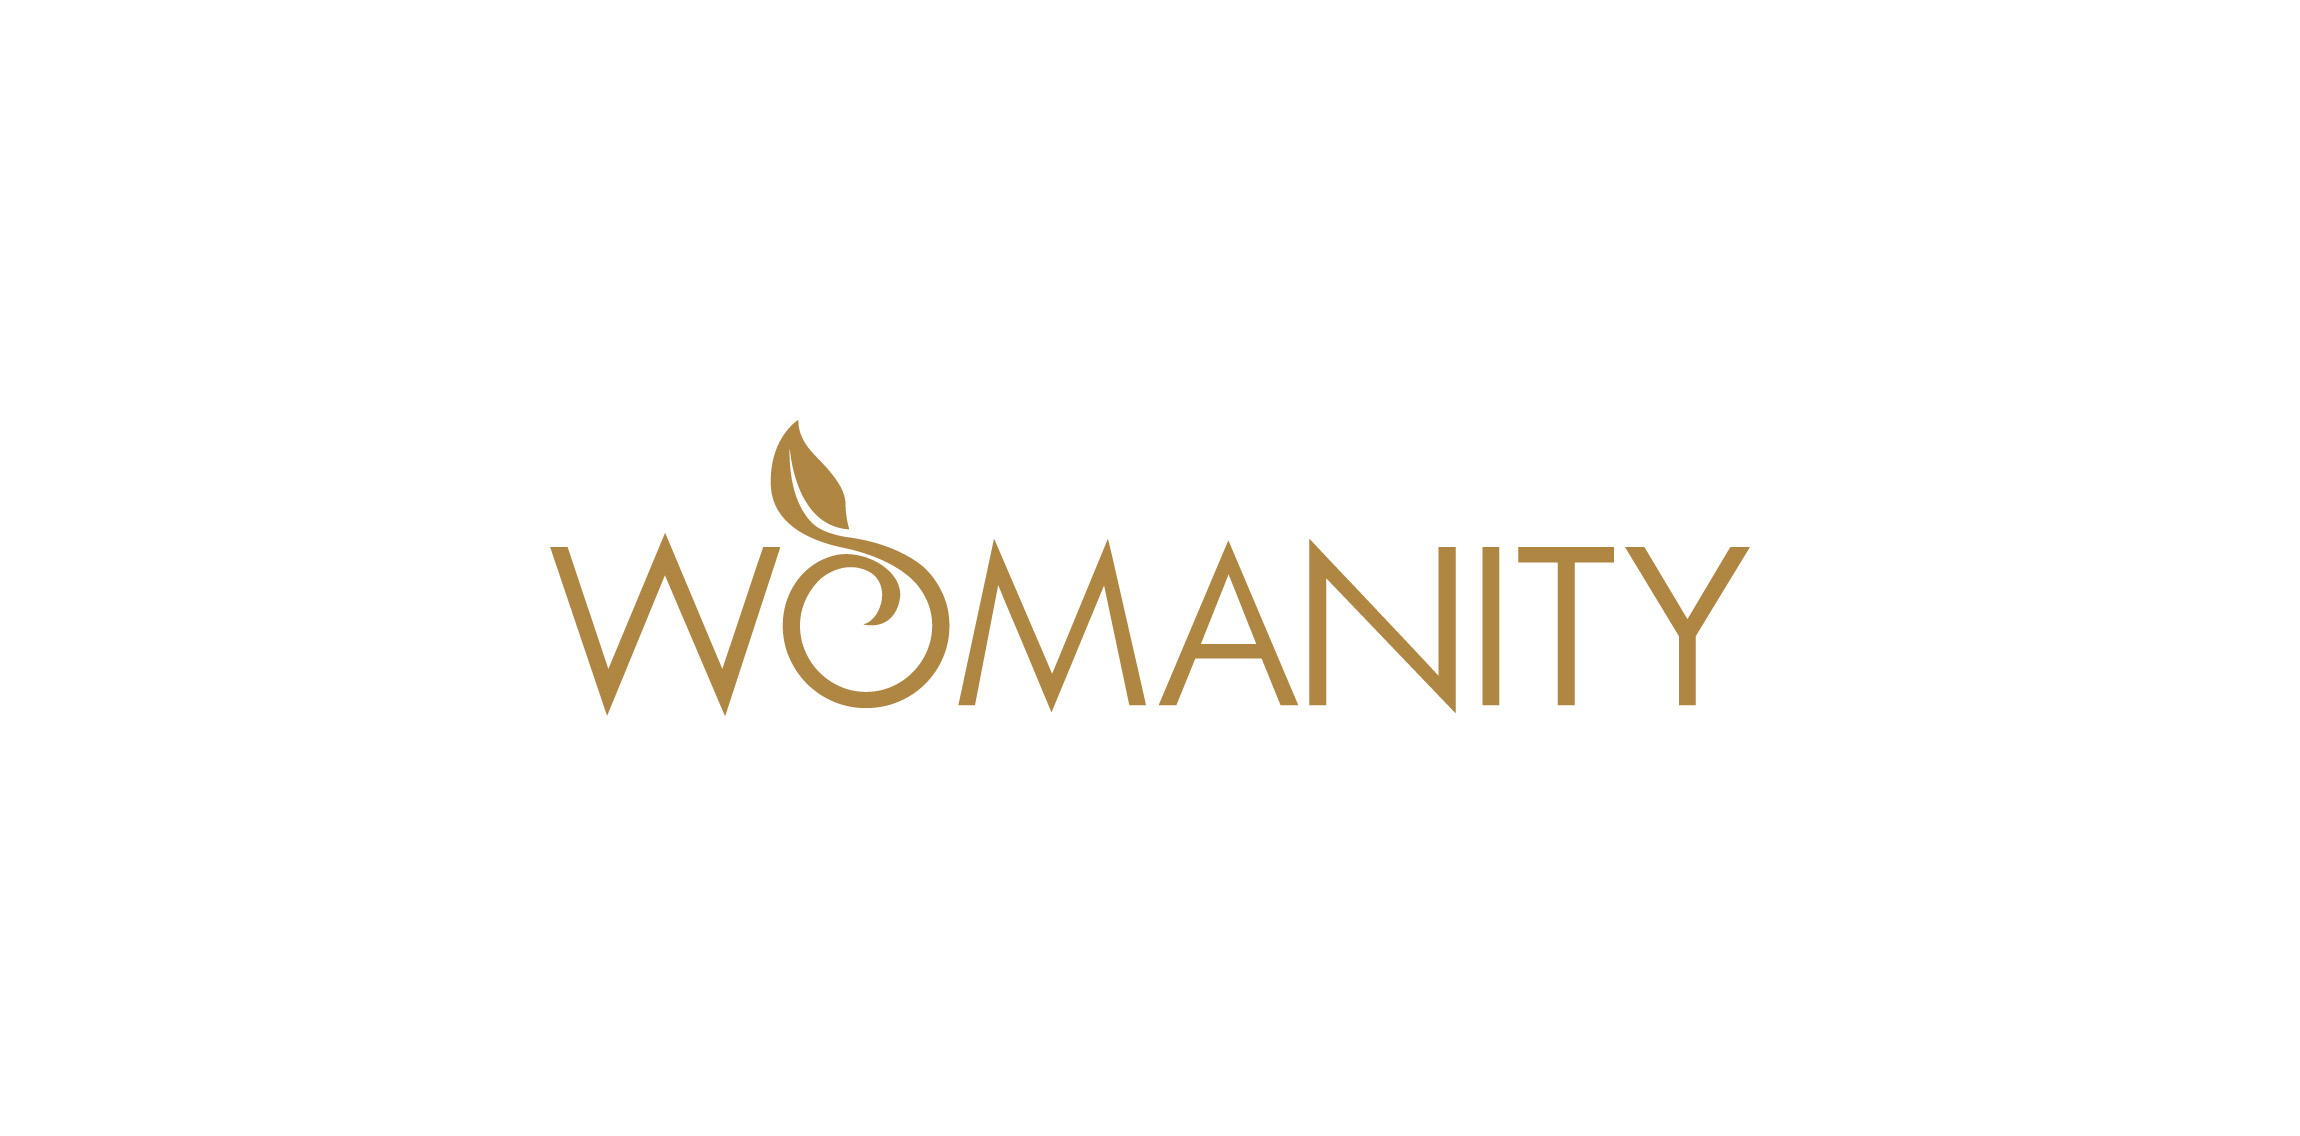 Womanity